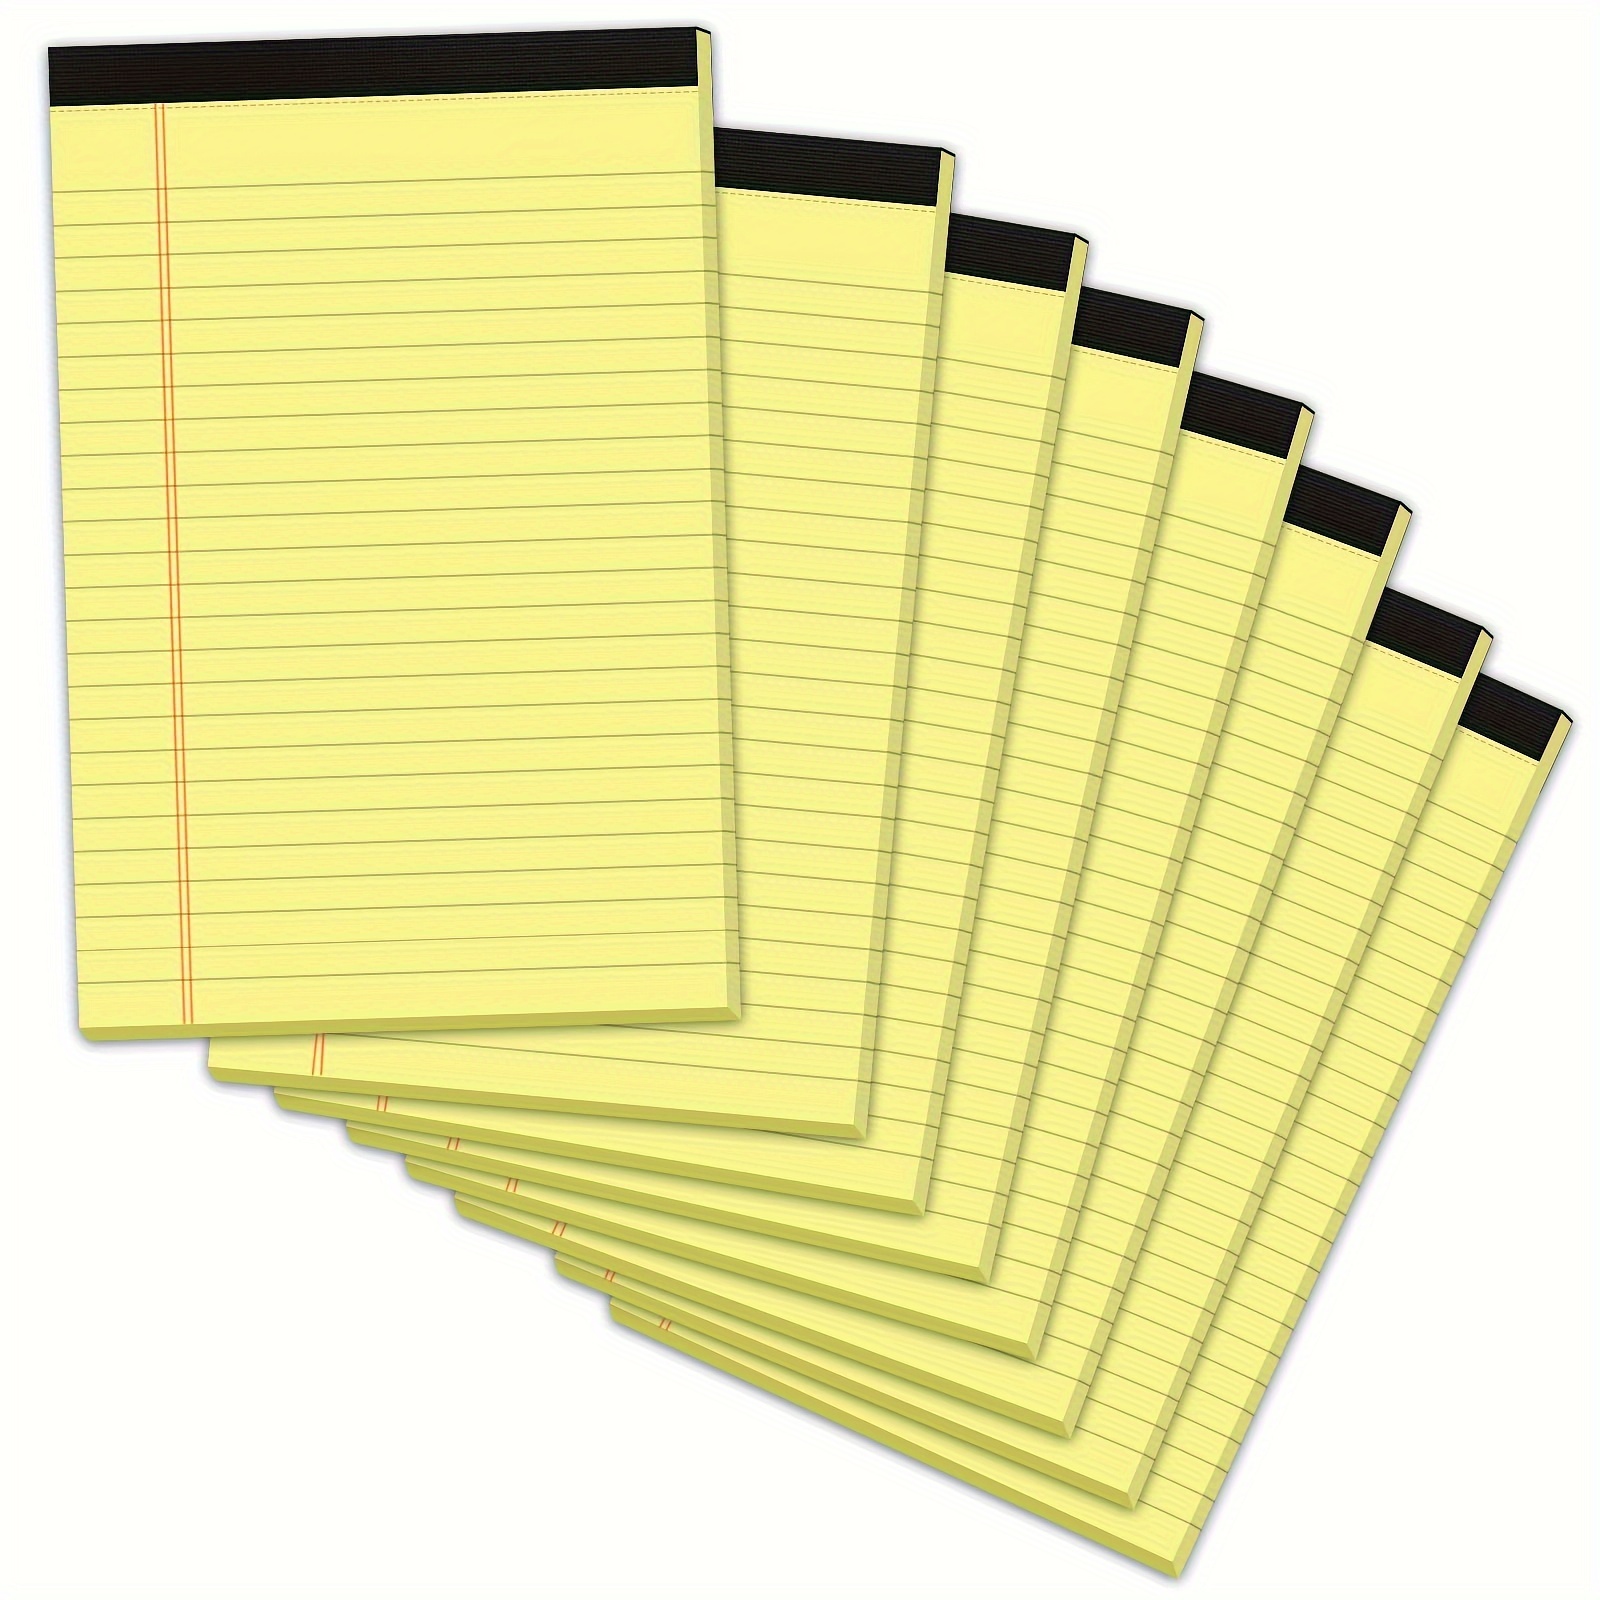 

8pcs, Yellow Legal Pads 5x8 Small Note Pads 240 Sheets Perforated Yellow Pads Paper Narrow Ruled Writing Pad 80gsm Premium Thick Paper College Ruled Legal Notepads For Students, Office, Business